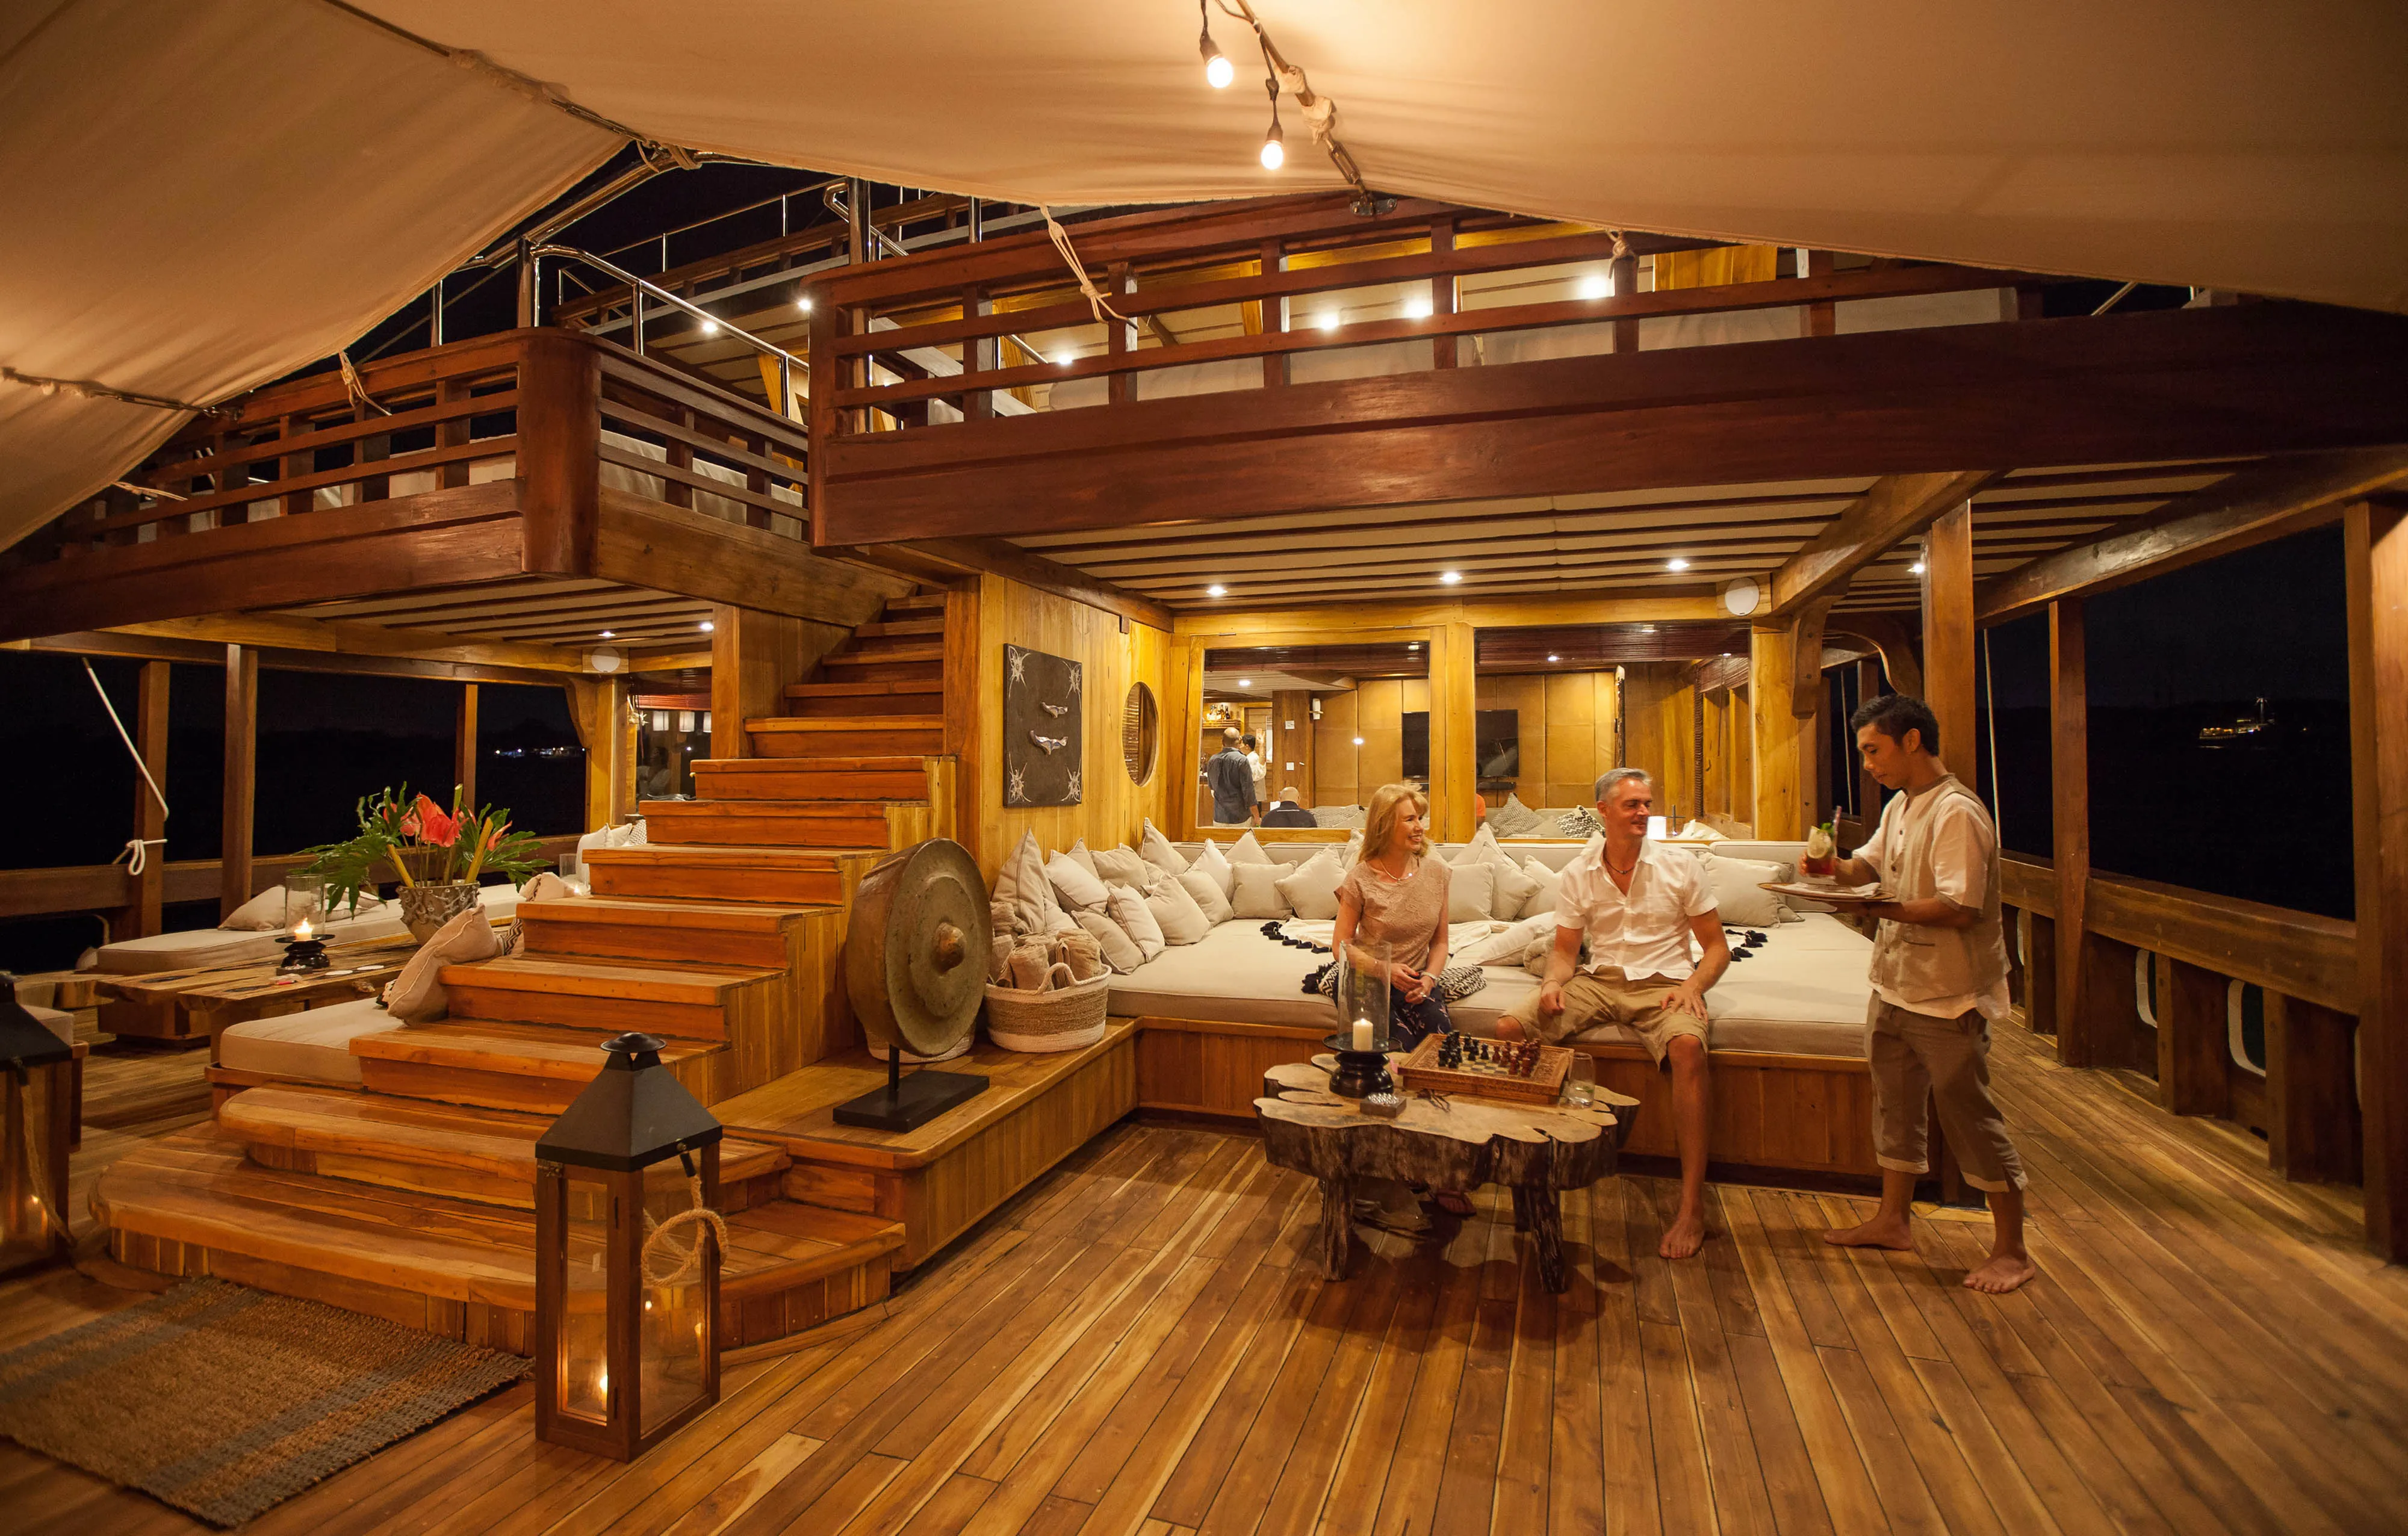 Top Evening Entertainment Experiences Aboard a Luxury Yacht